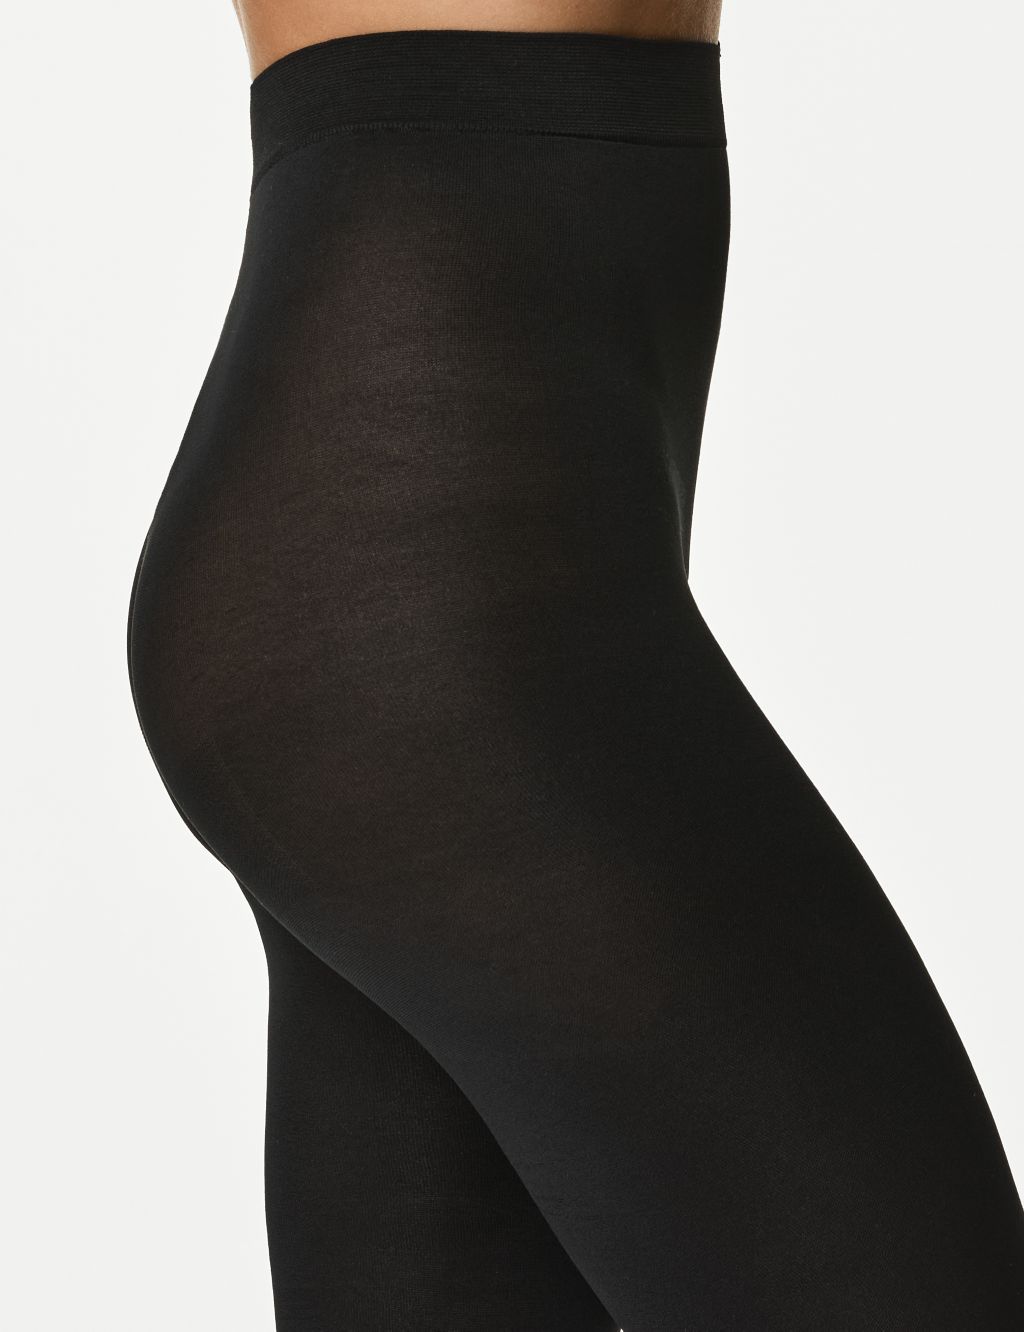 2pk 80 Denier Supersoft Opaque Tights image 3